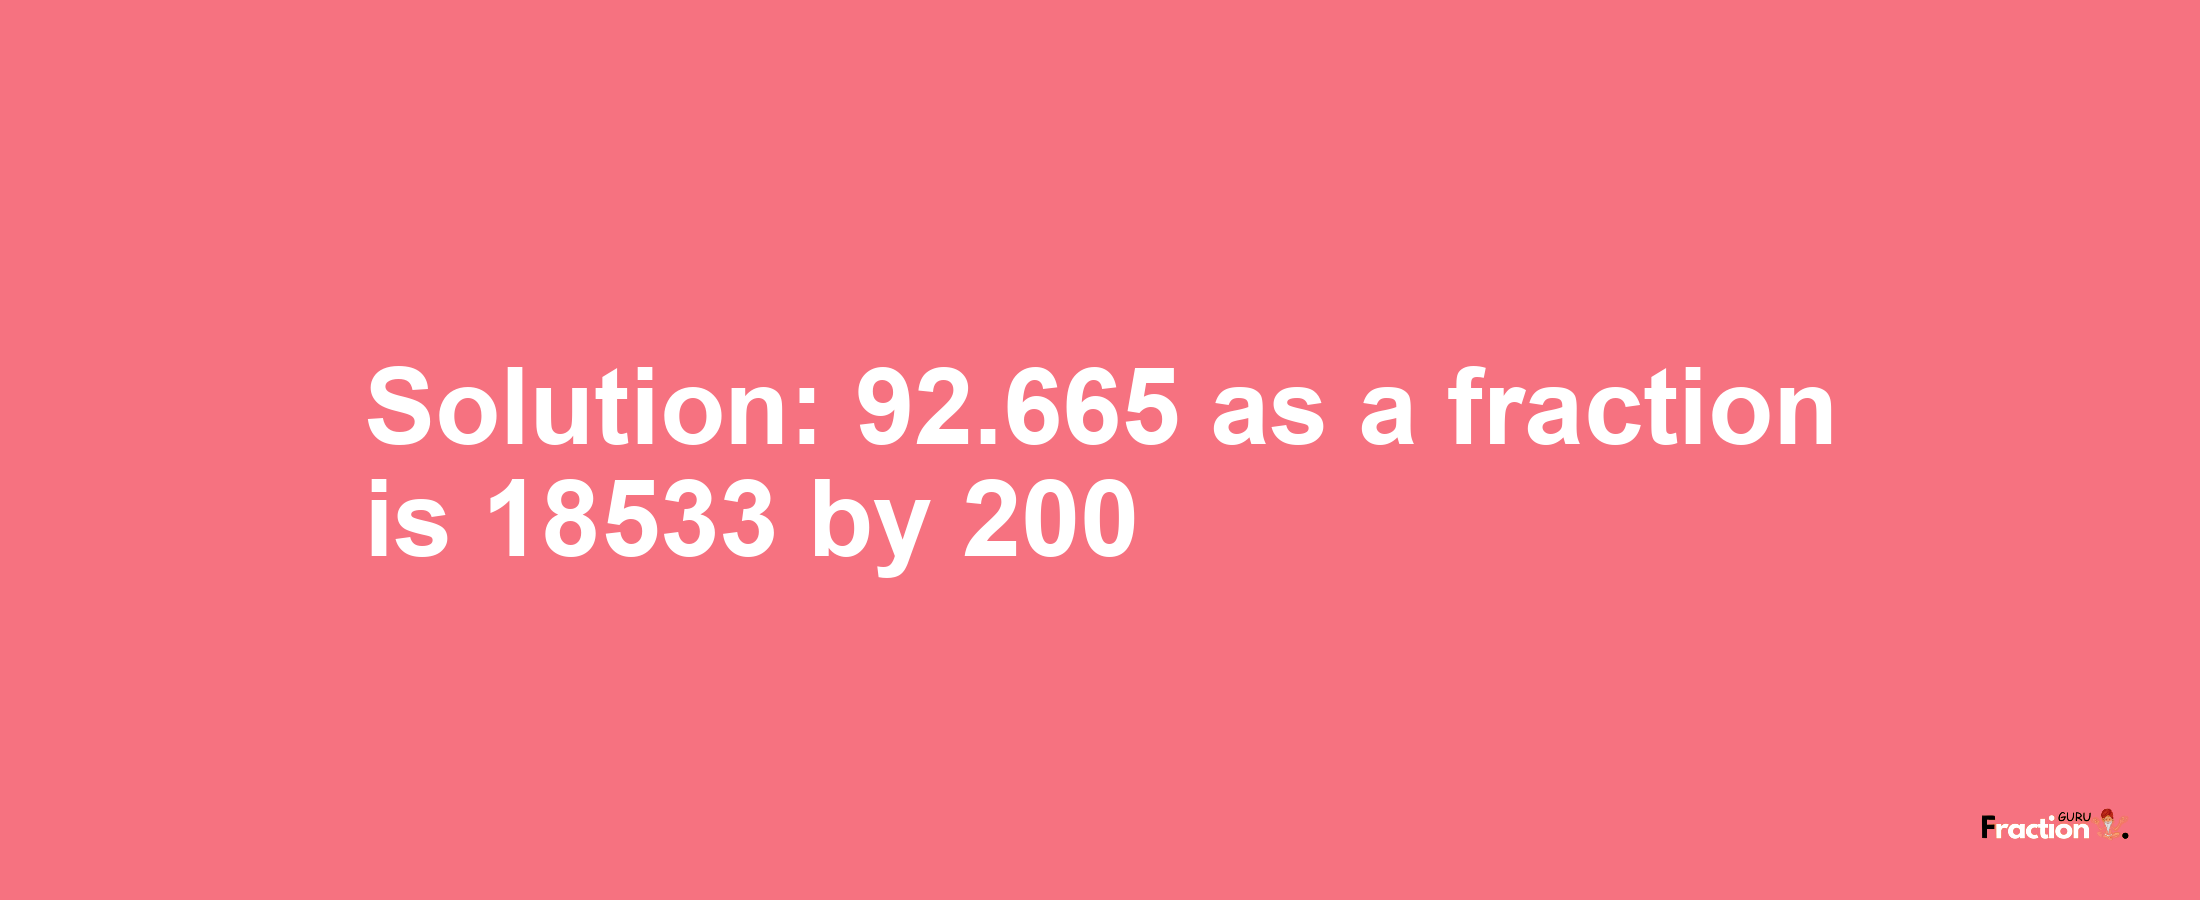 Solution:92.665 as a fraction is 18533/200